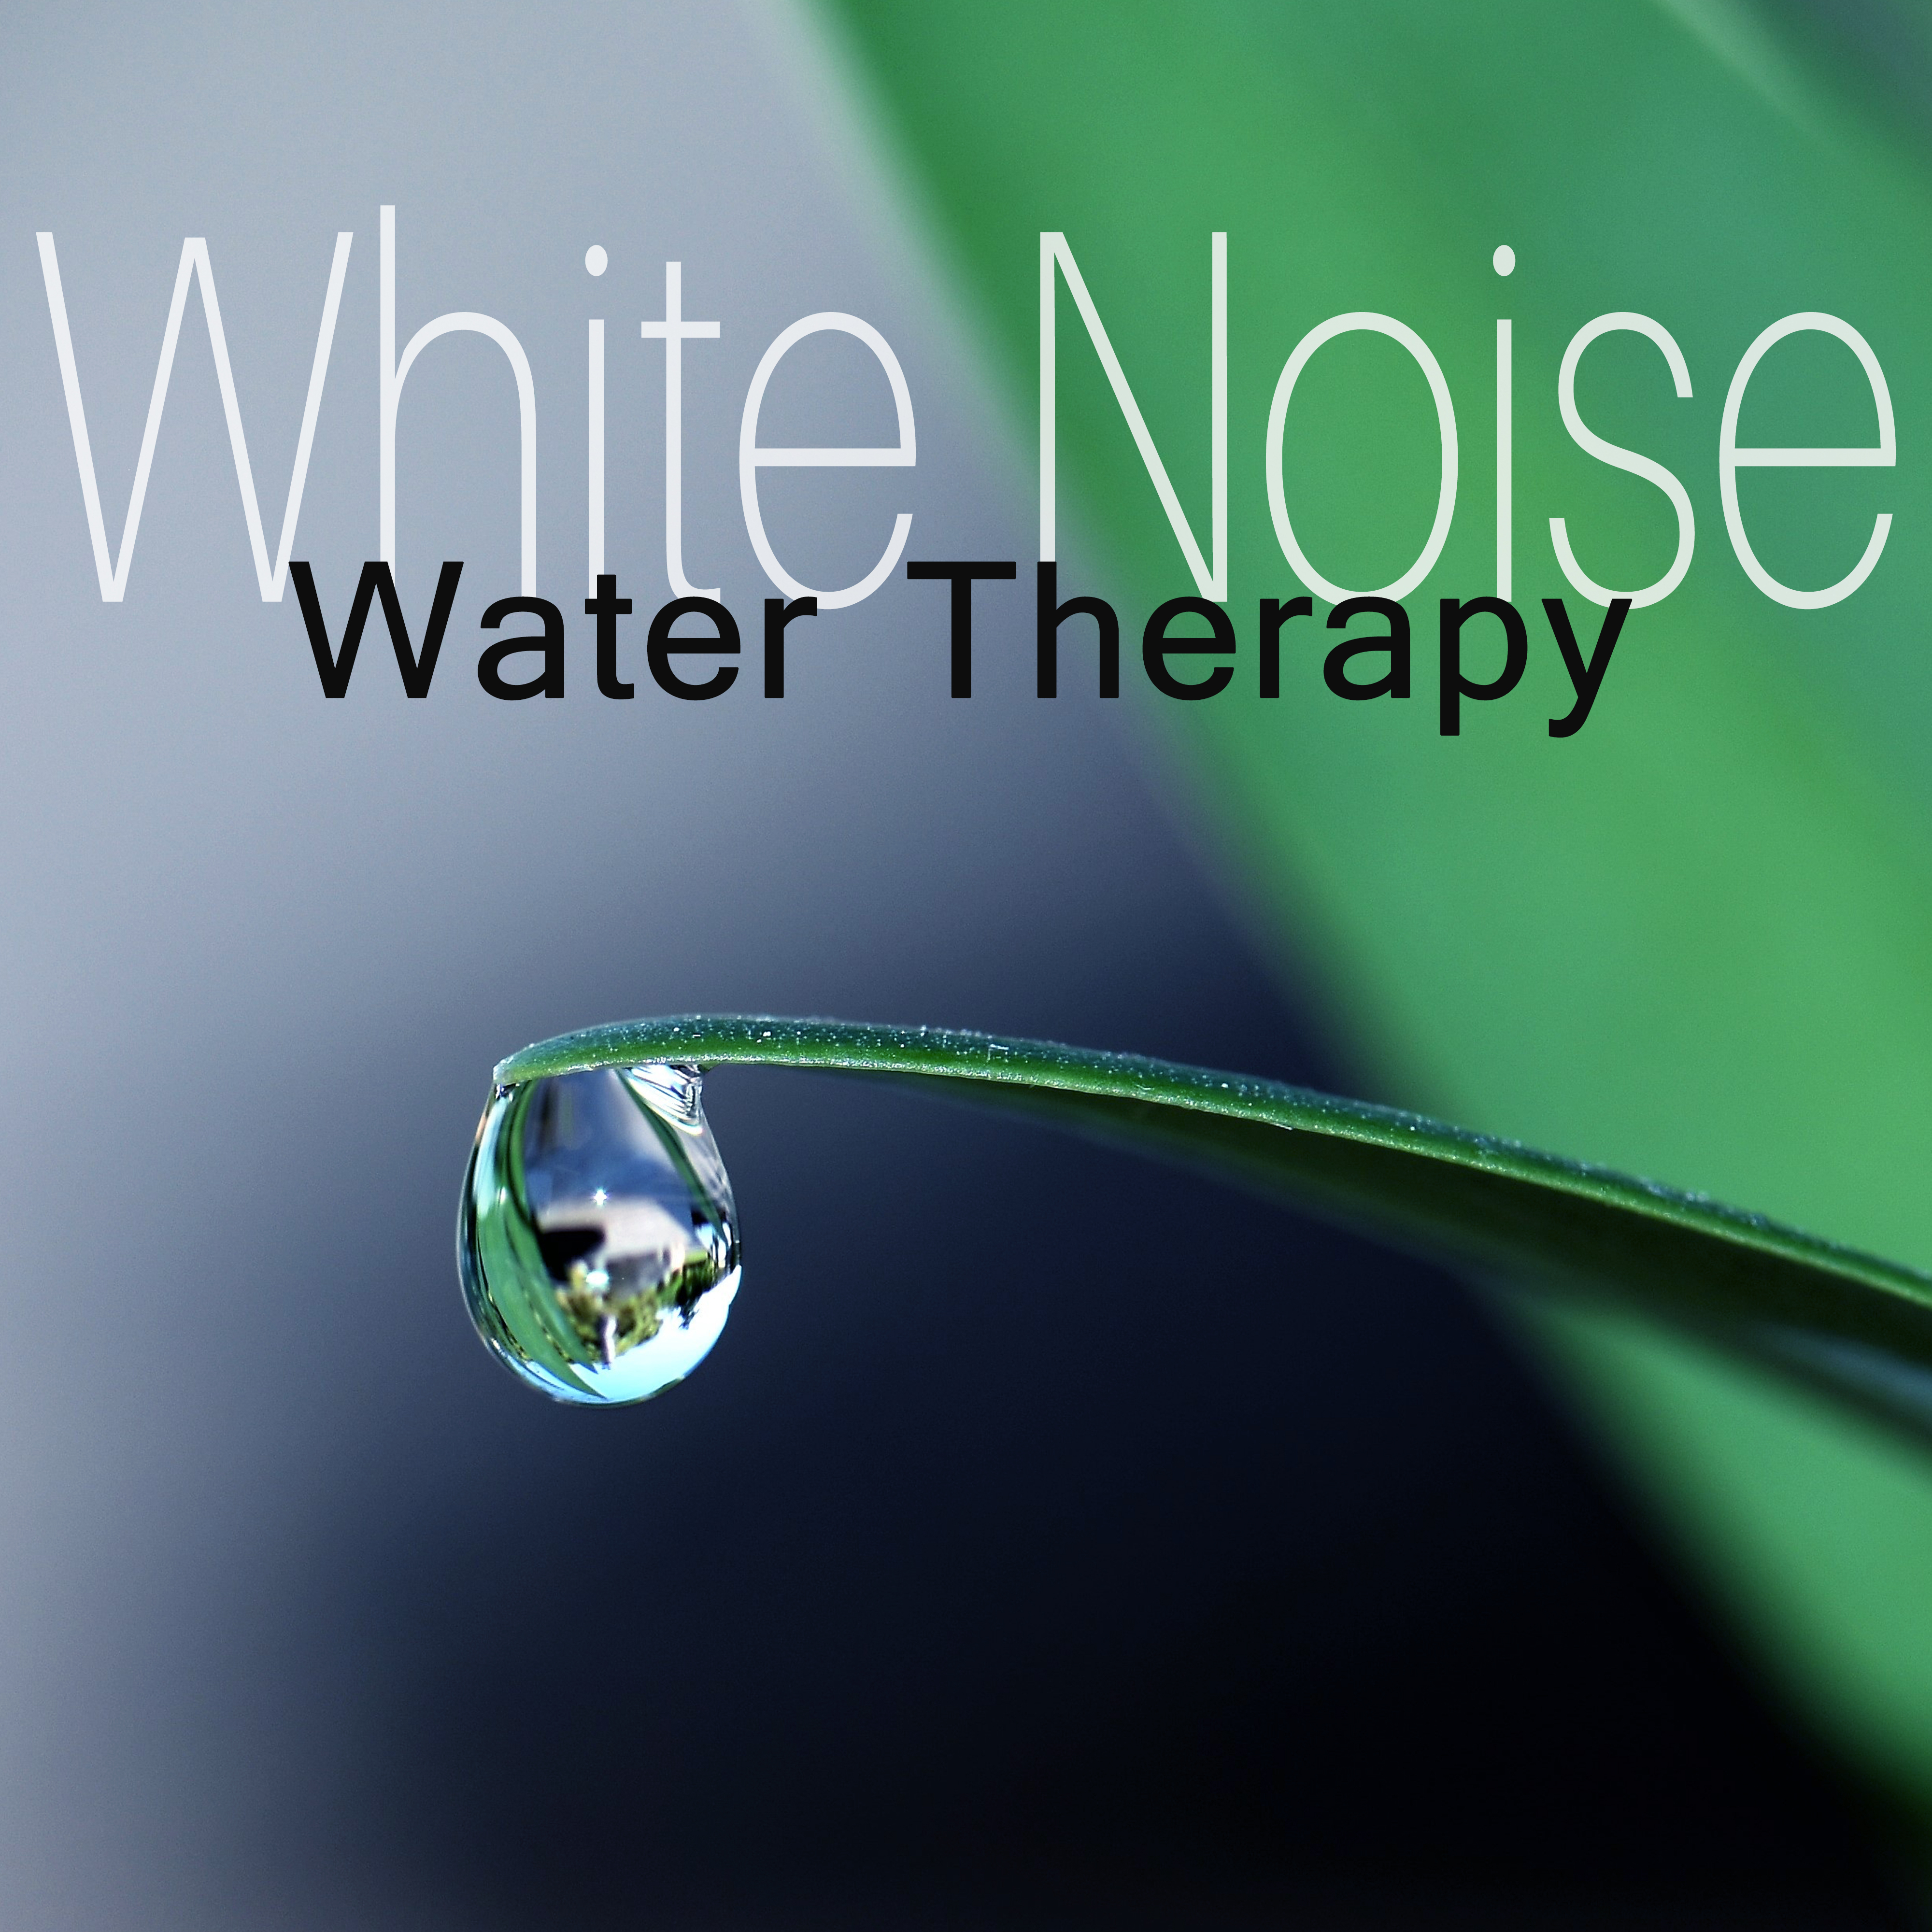 White Noise Water Therapy – Nature Sounds, White Noise Therapy, Music for Sleep, Rest, Relief Stress